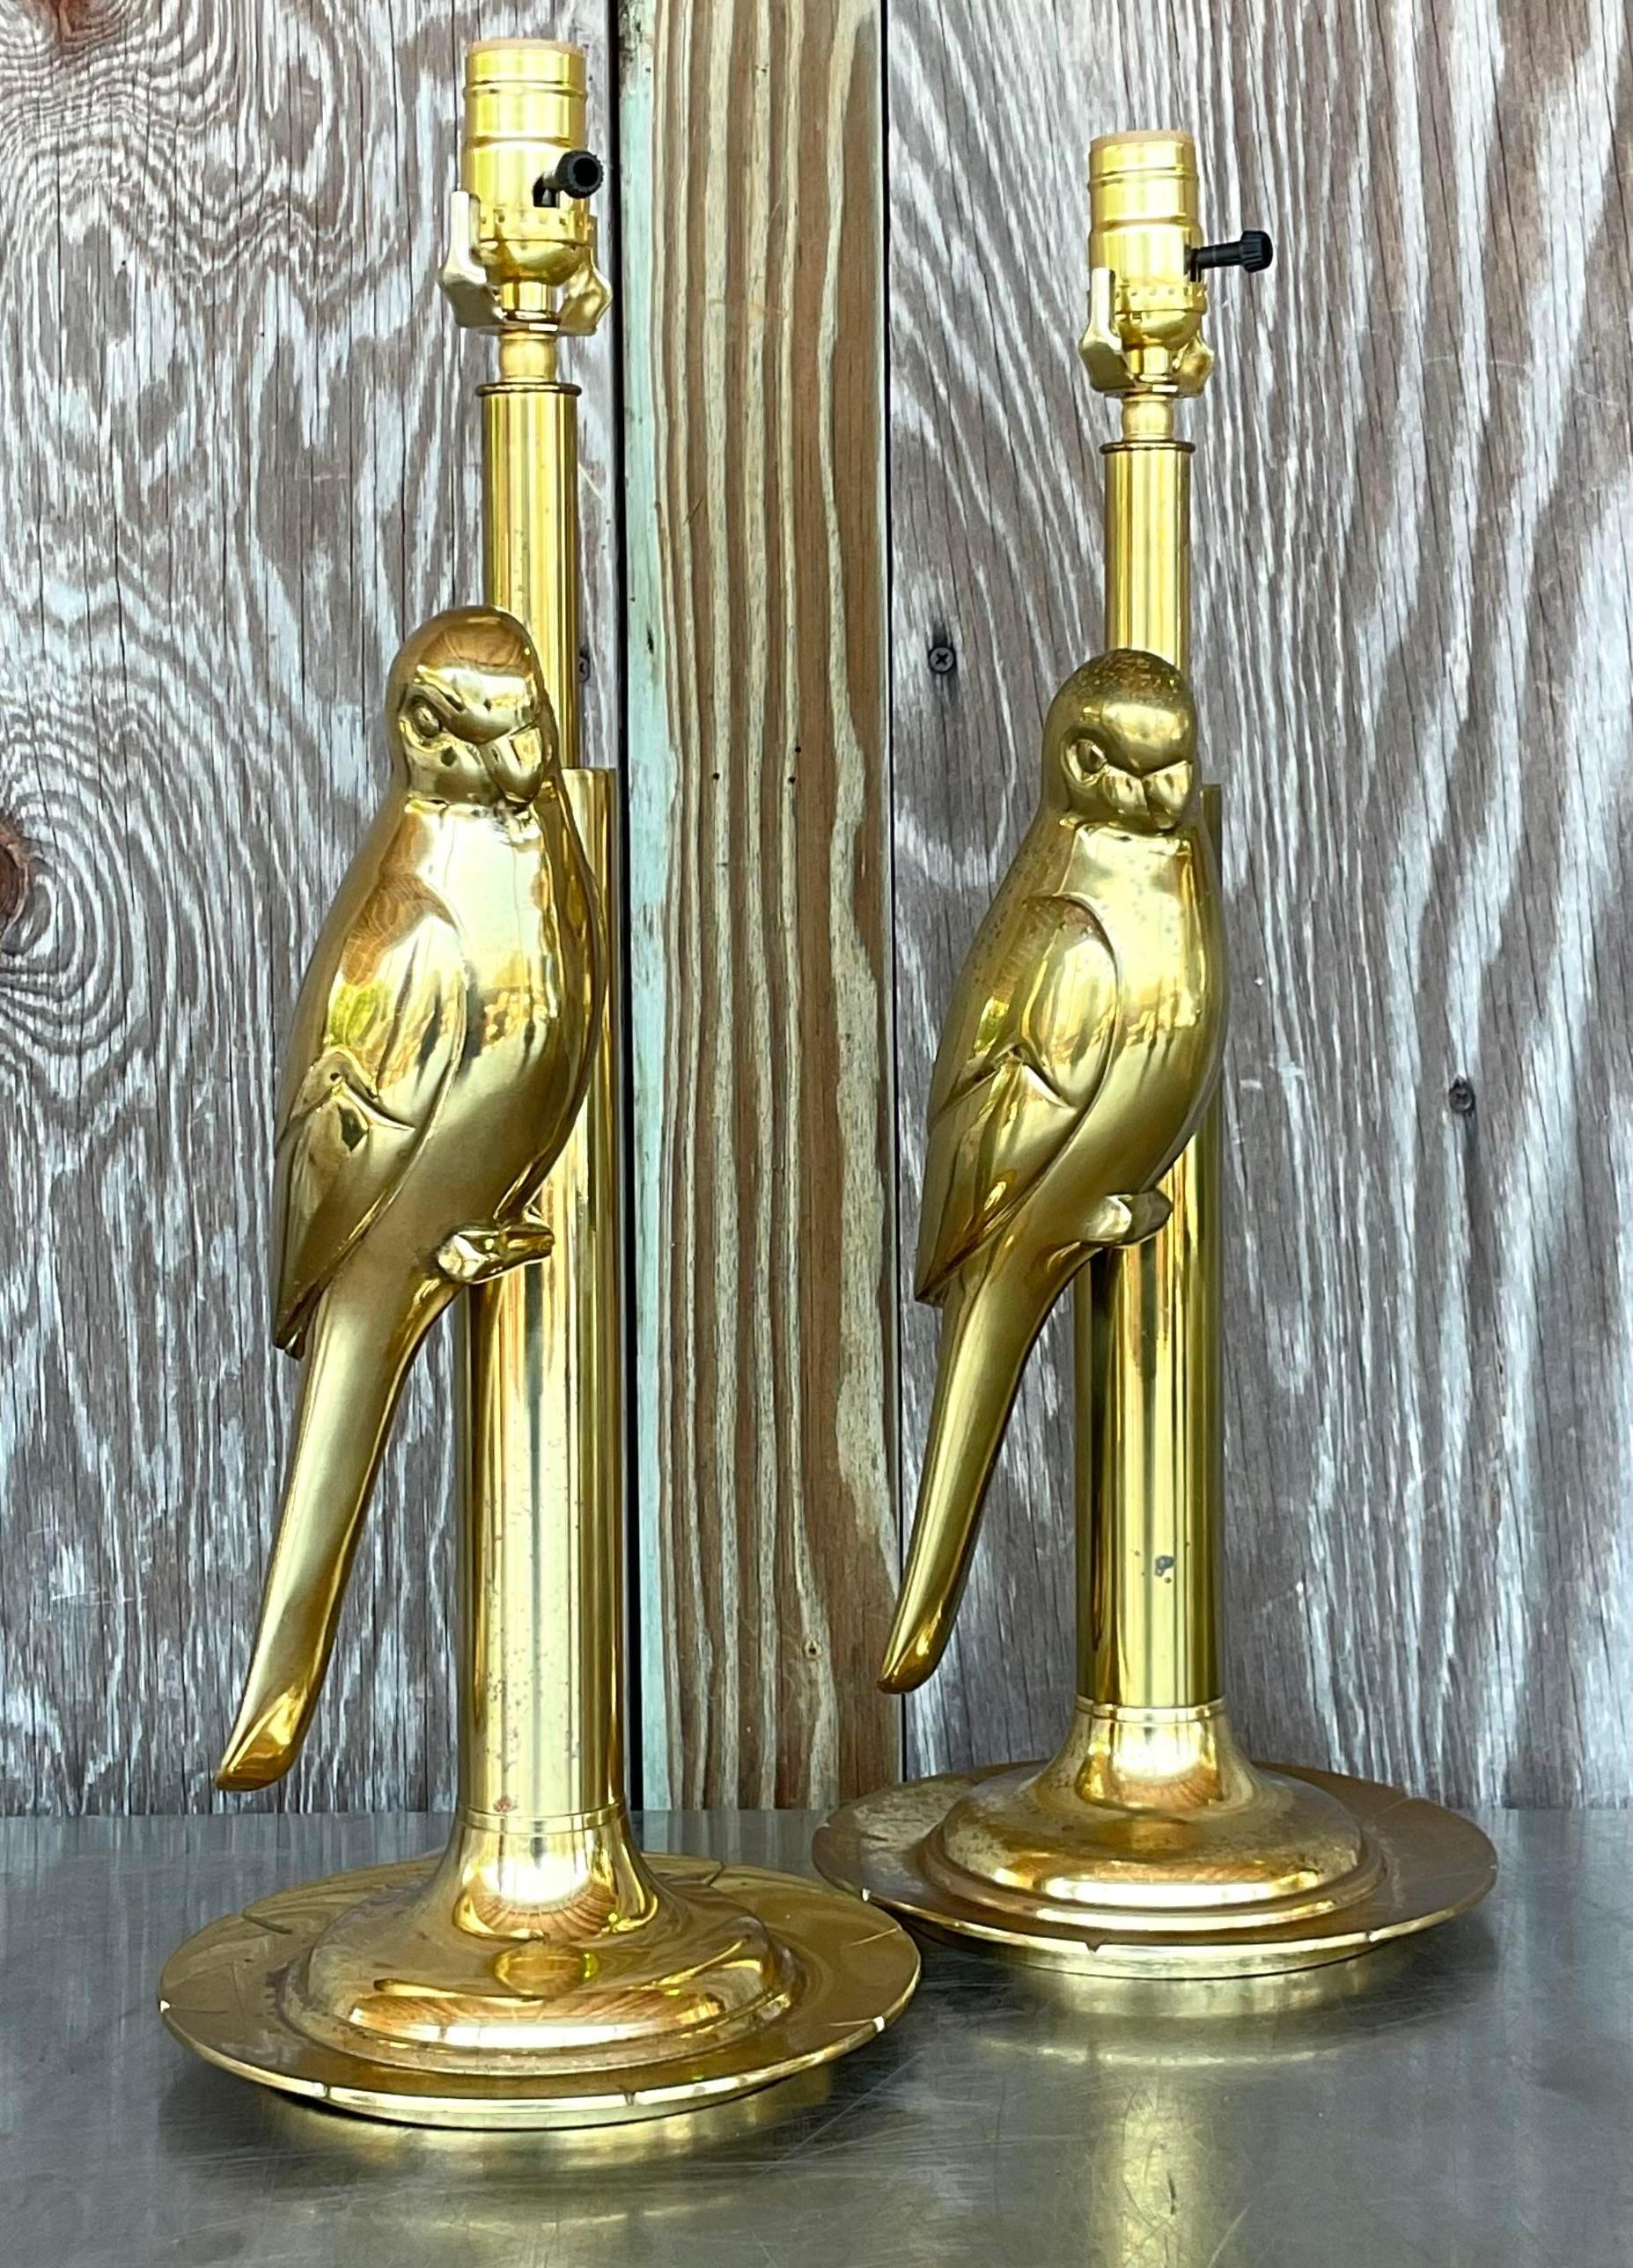 Mid-Century Modern Vintage Boho Polished Brass Parrot Lamps - a Pair For Sale